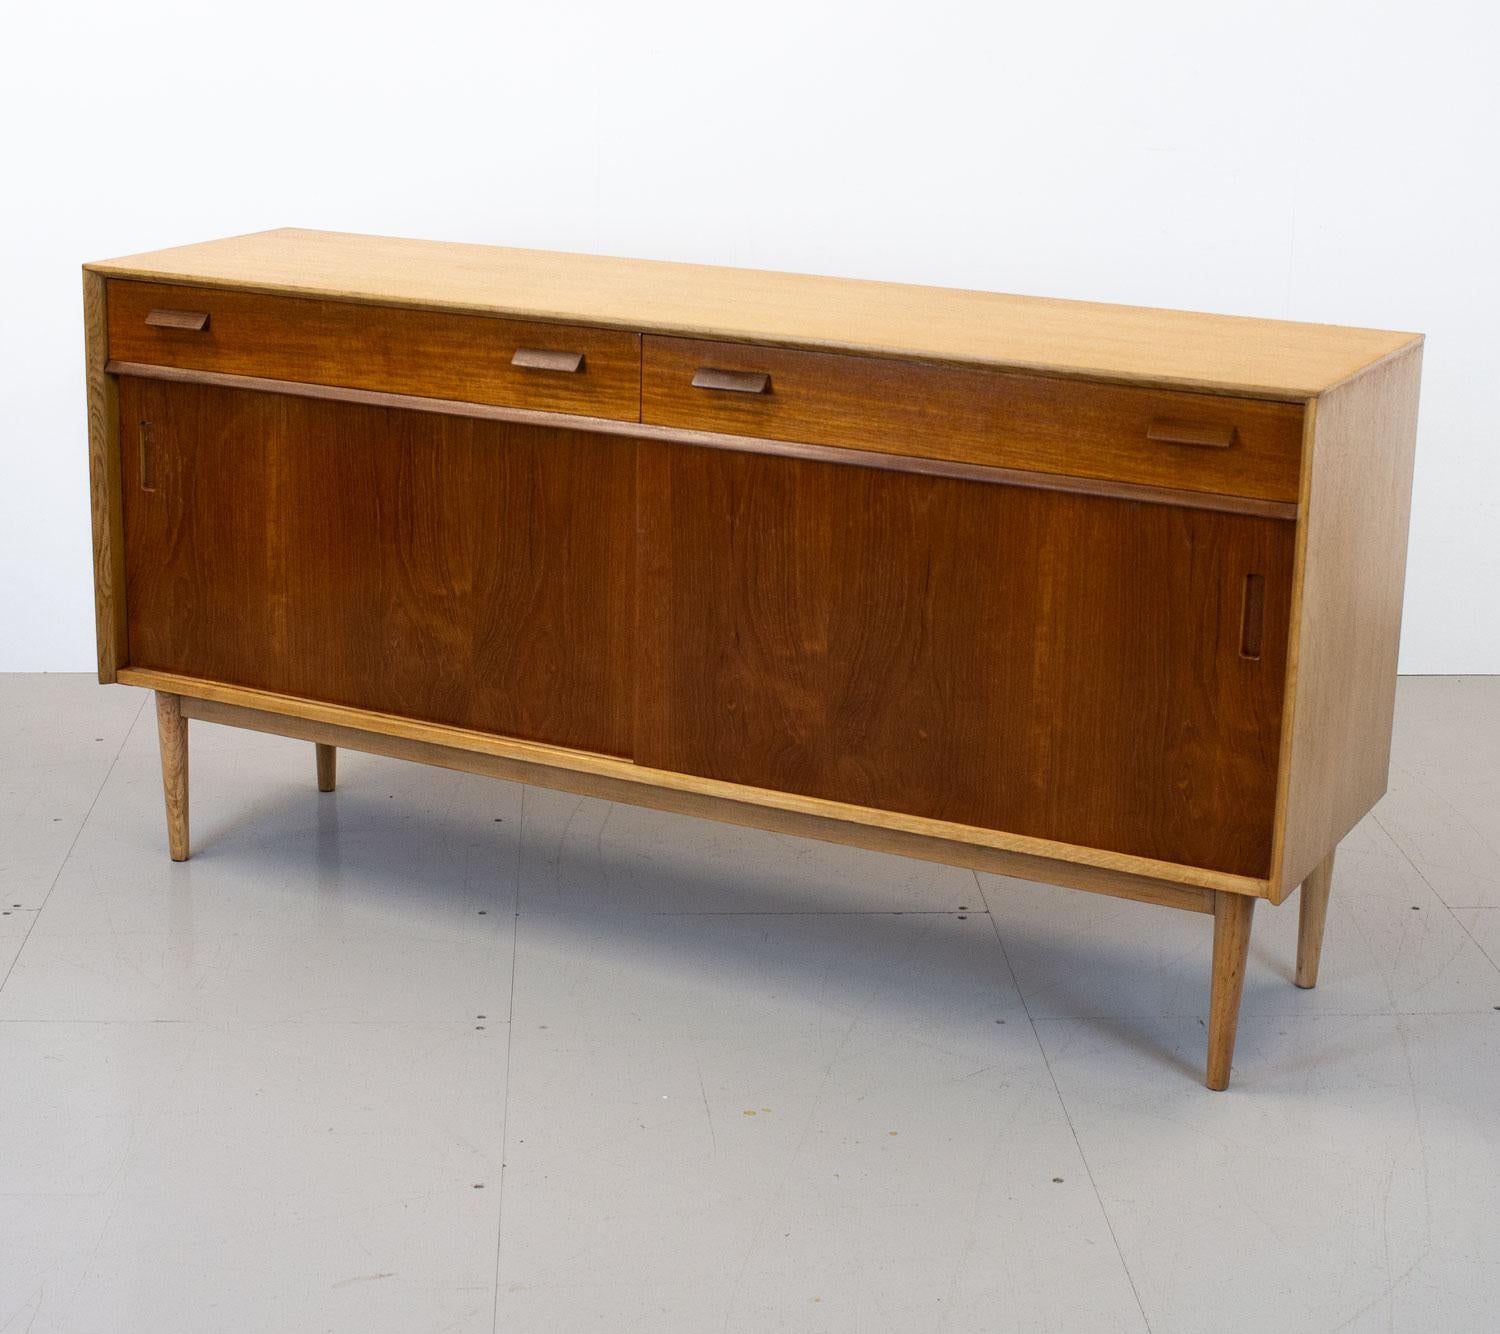 Rare G Plan sideboard by E Gomme. Part of the Group 3 range, it was designed by Richard Young in the early 1960s who later went on to form Merrow Associates. Minimal in design it has an oak frame, teak sliding doors and drawers with afromosia detail